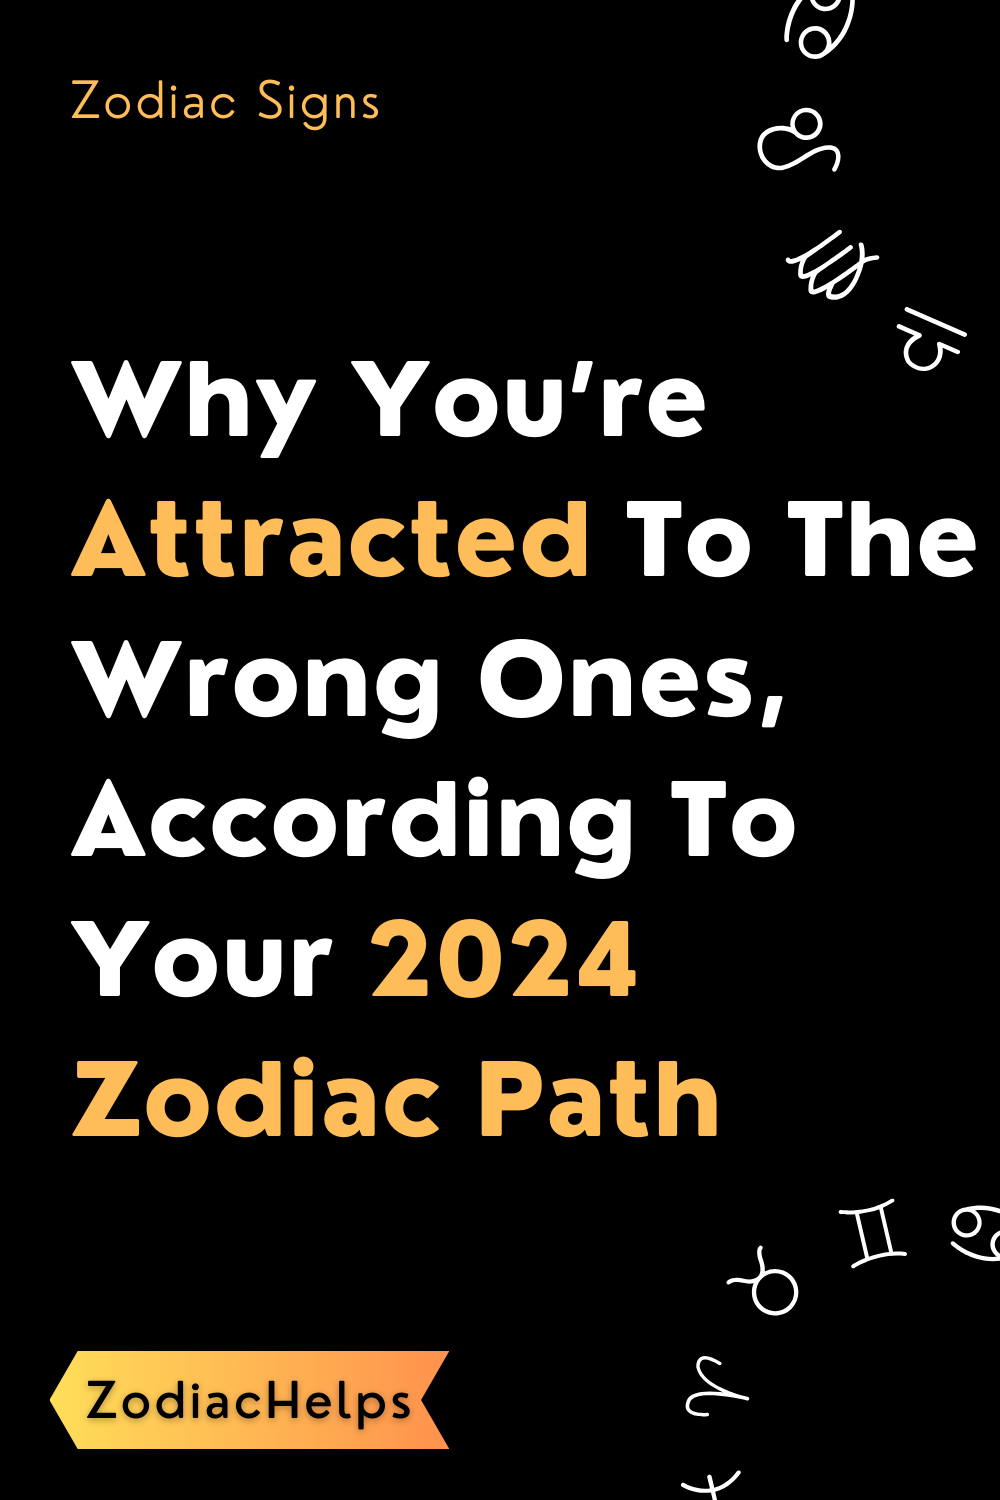 Why You’re Attracted To The Wrong Ones, According To Your 2024 Zodiac Path